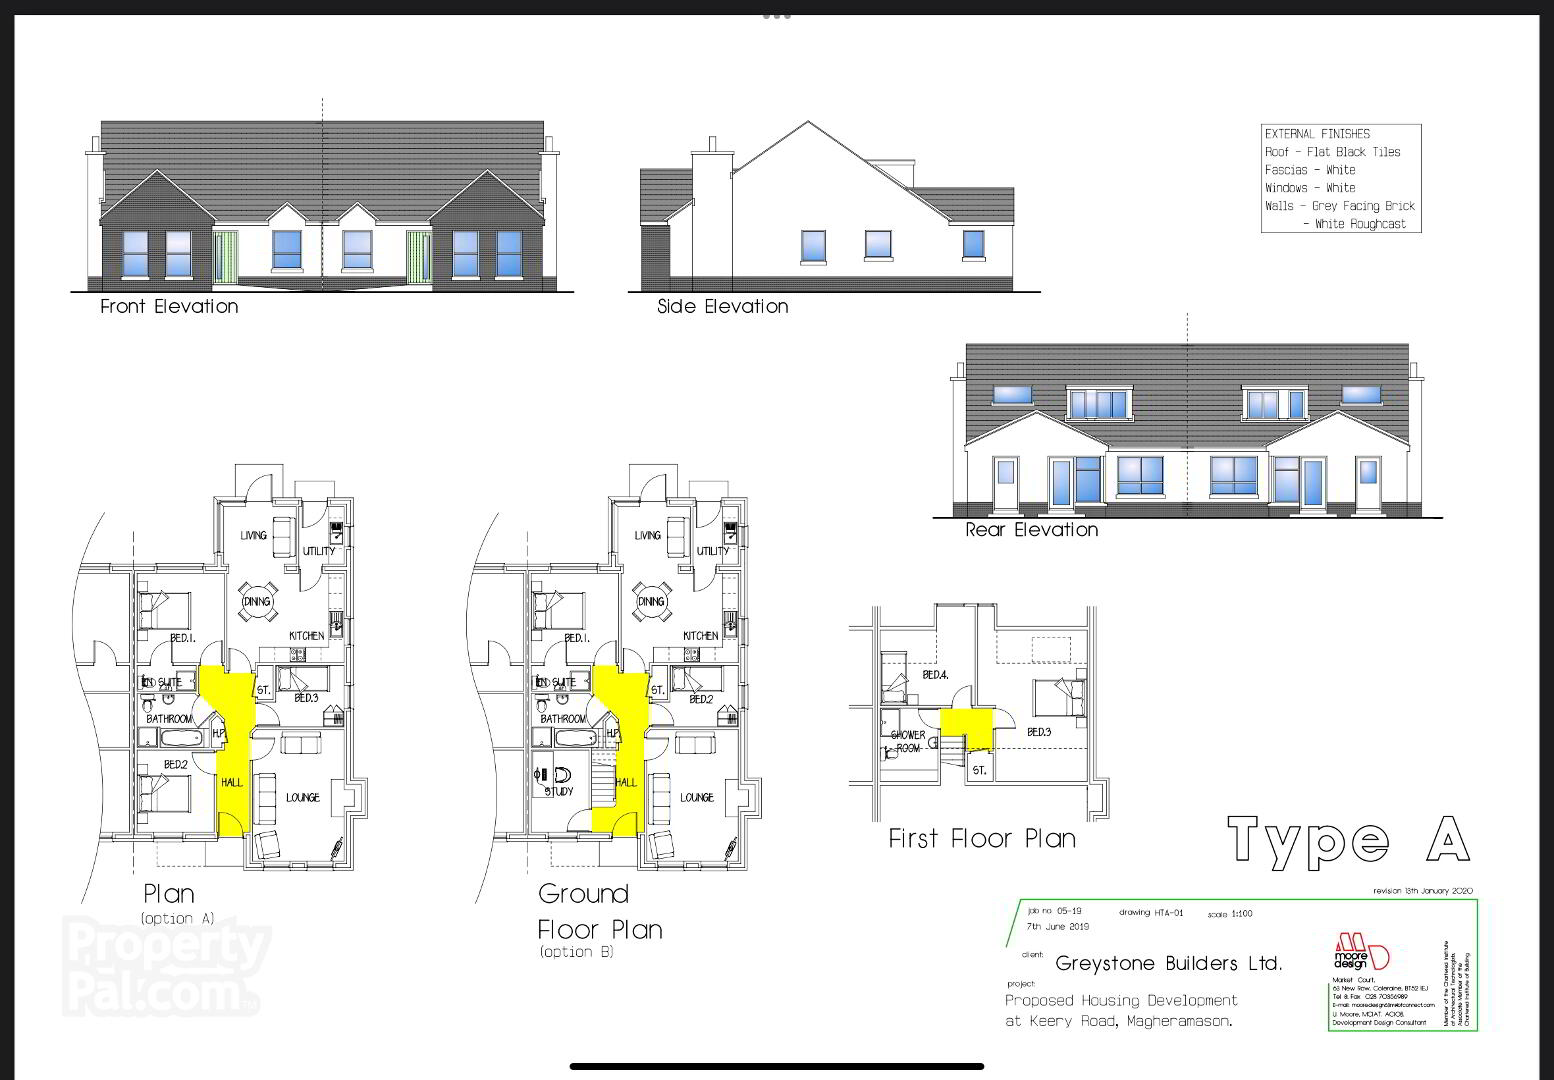 Development Land With Full Planning Permission, Keery Road